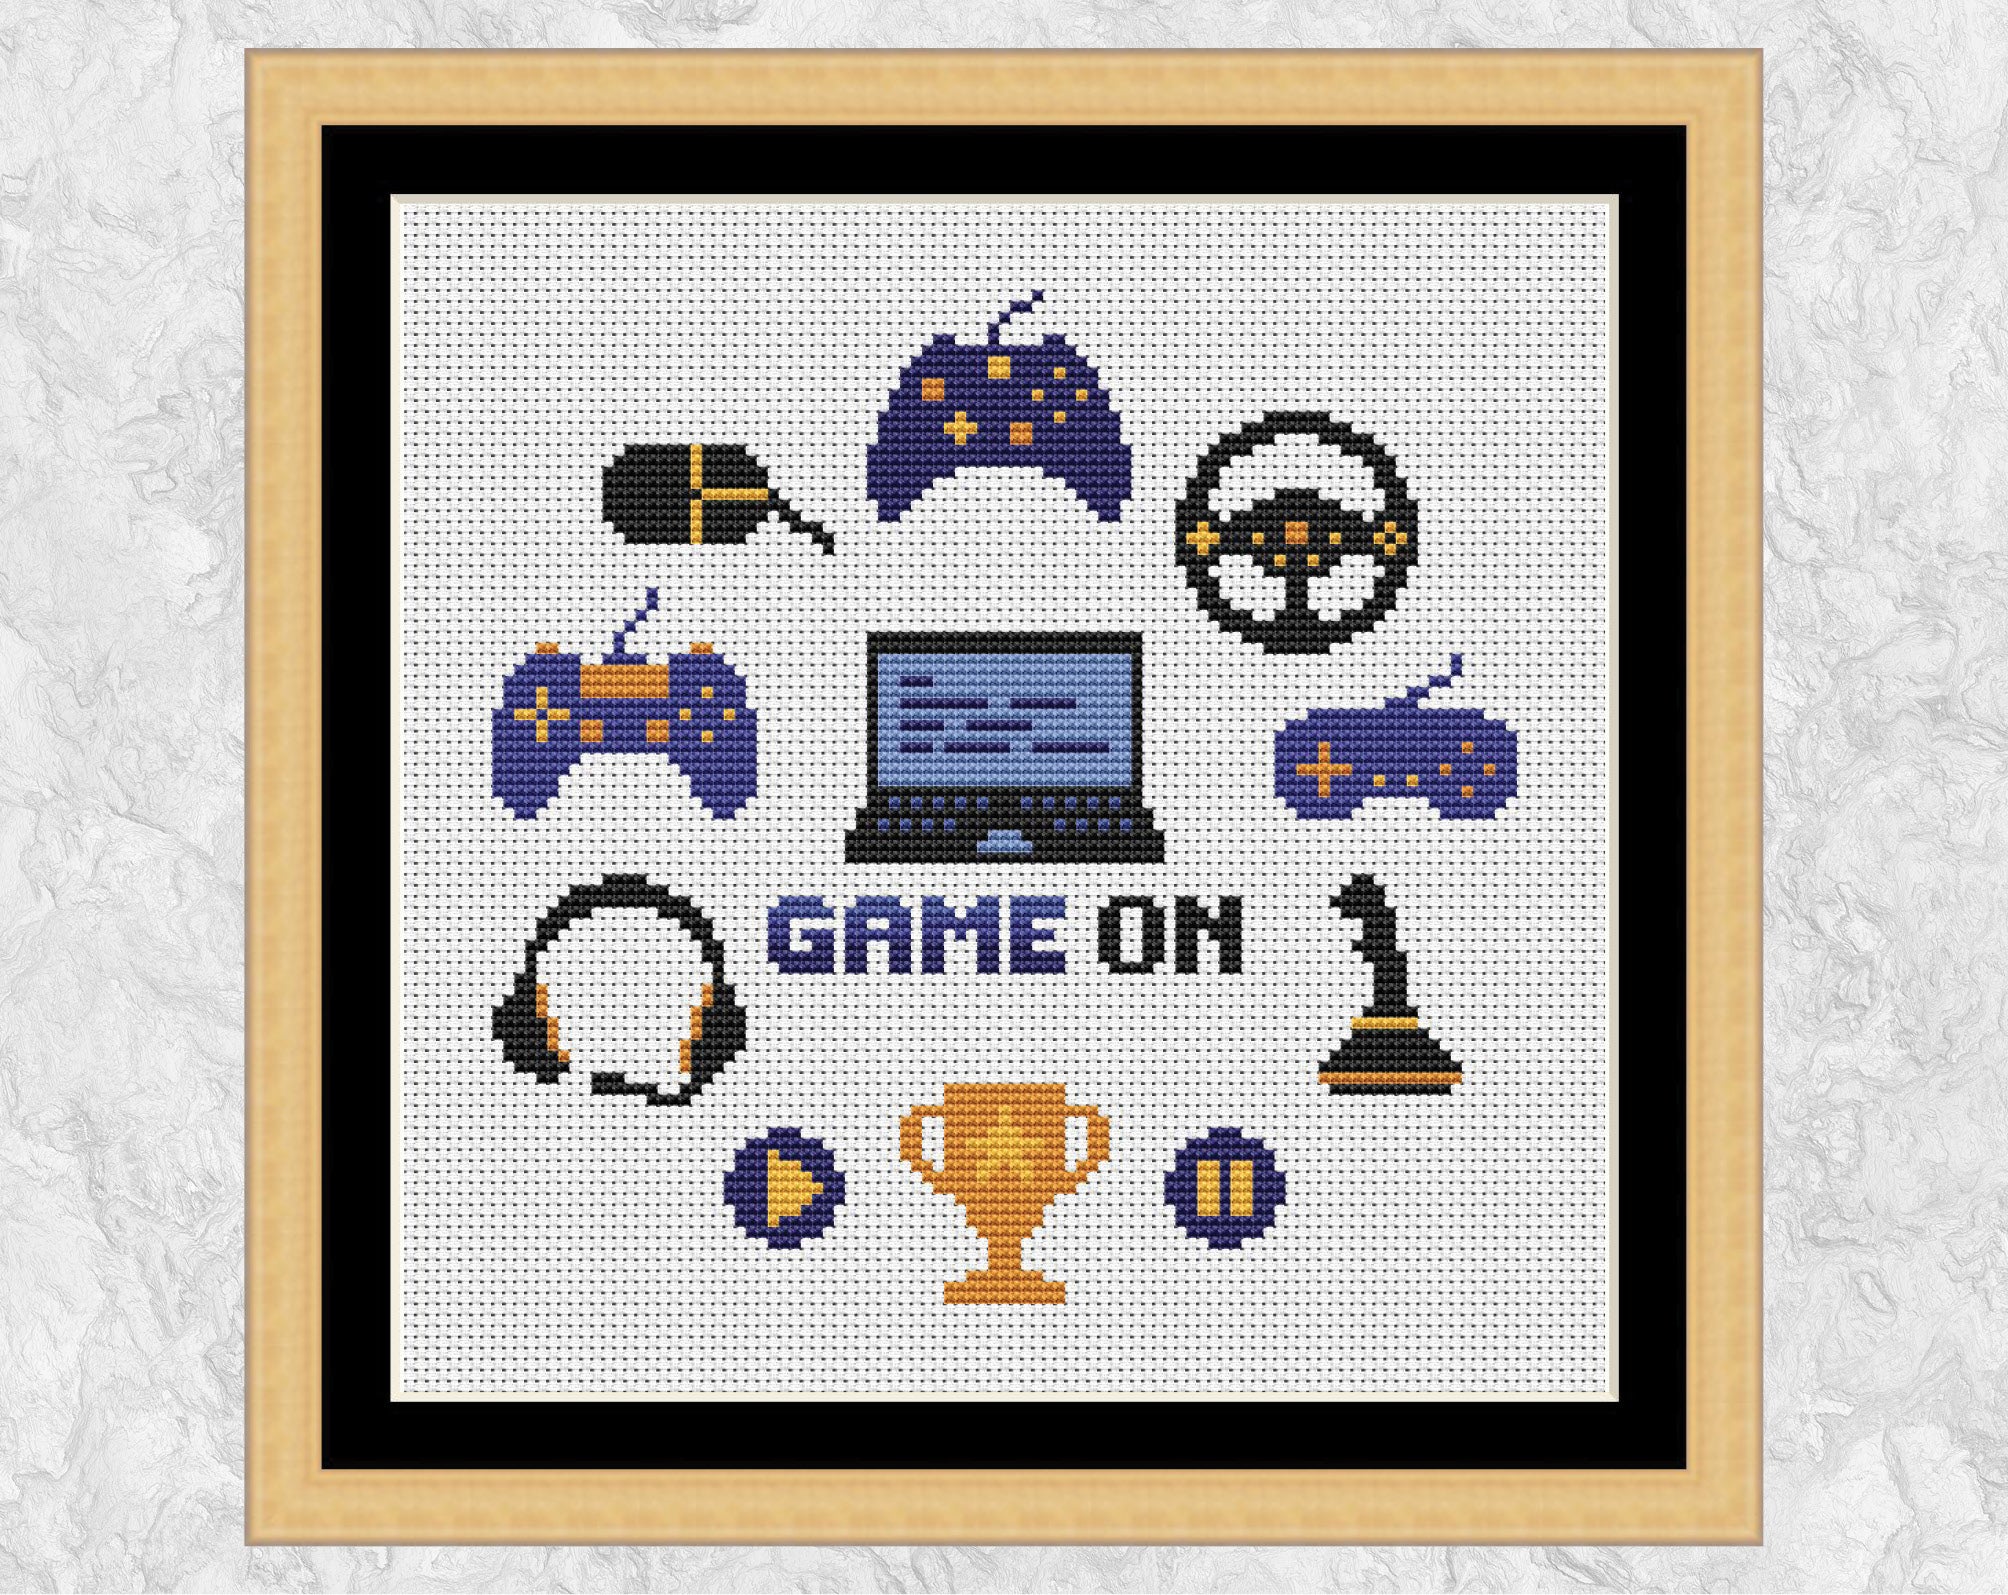 Game On computer games cross stitch pattern. Shown in frame.